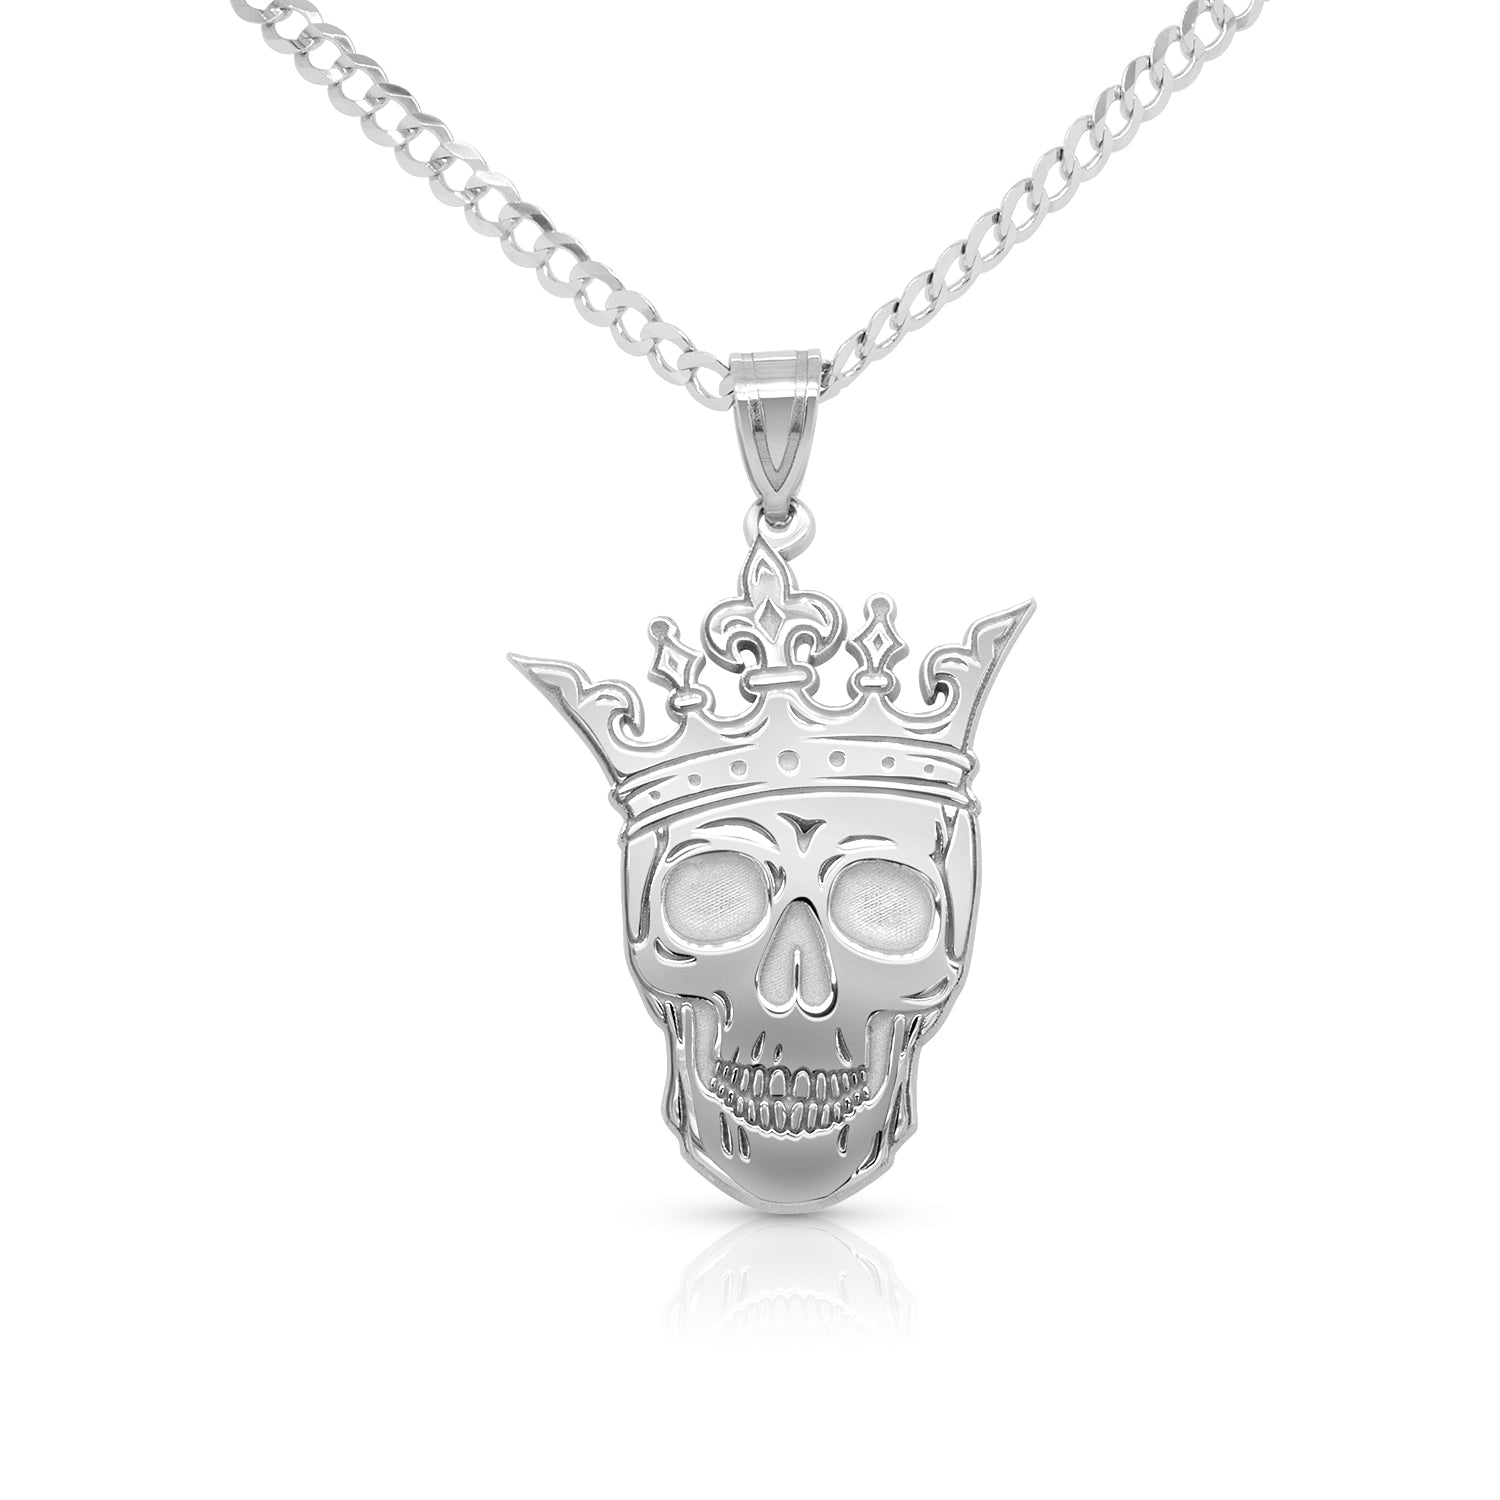 Silver skull with a crown pendant on a white background